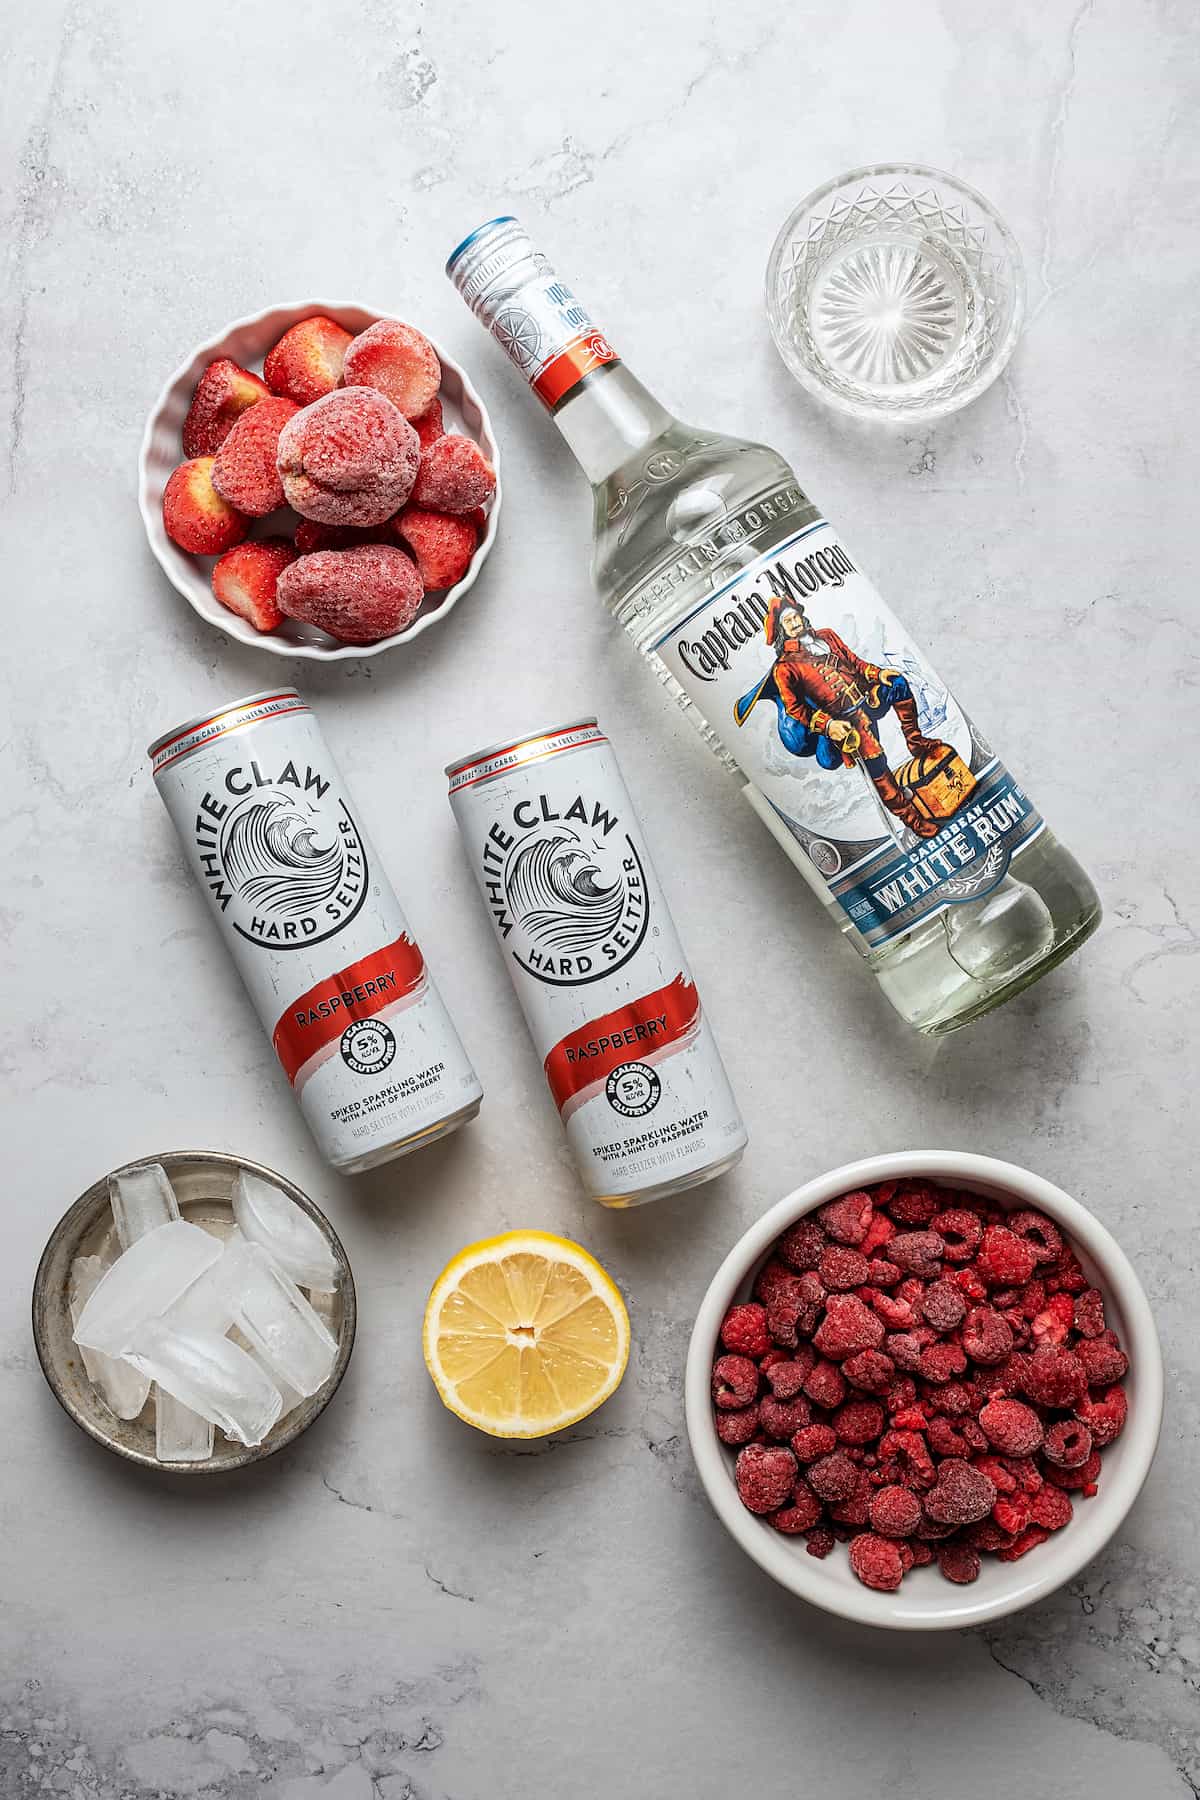 Berries, white claw cans, ice , lemon and Captain Morgan in a bottle.